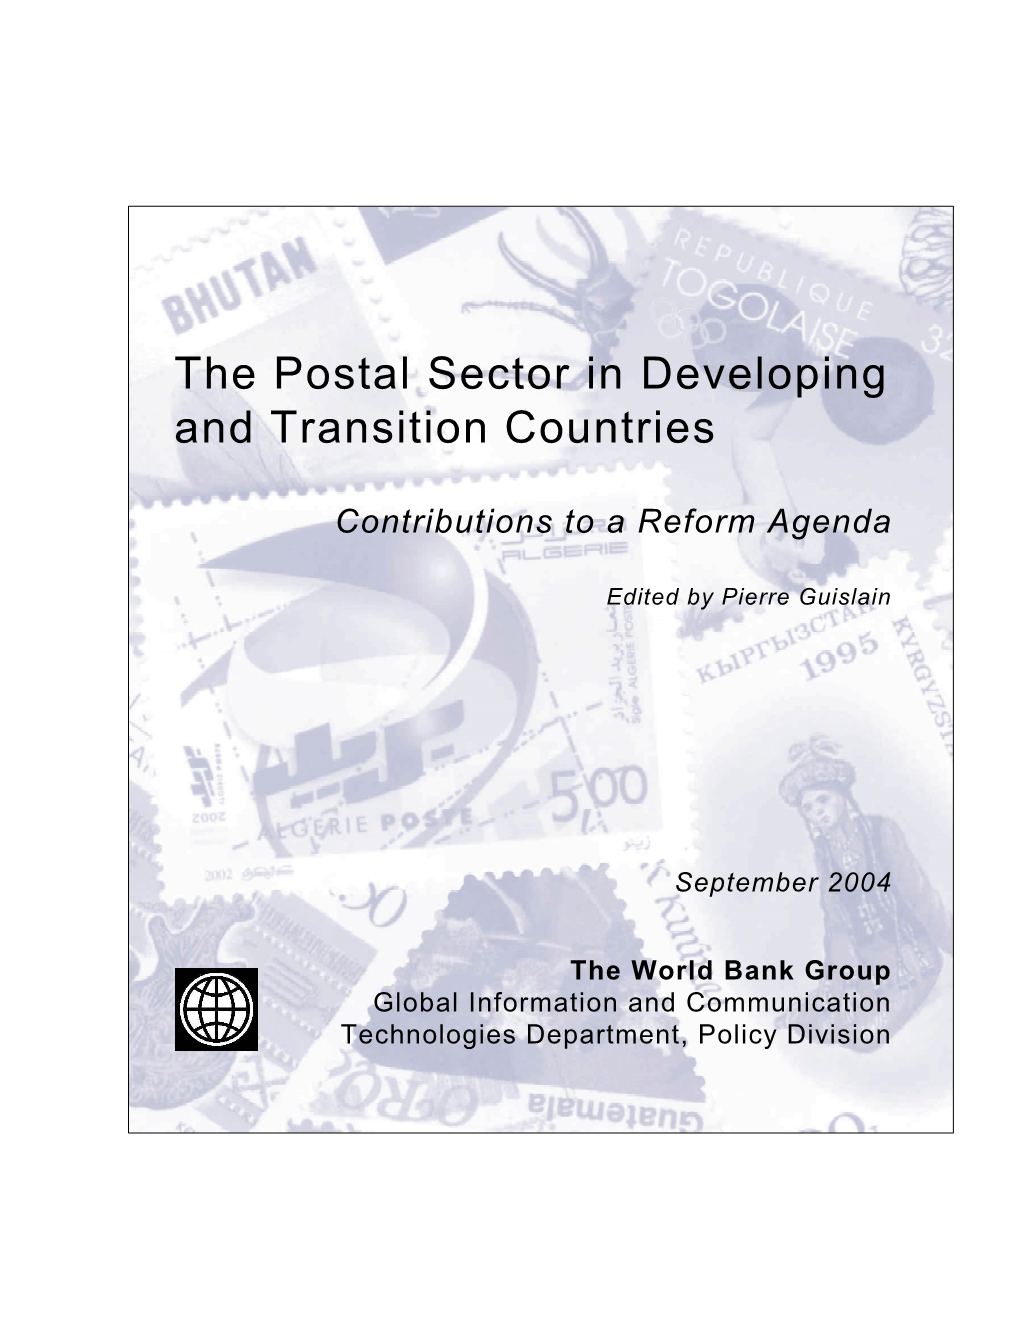 The Postal Sector in Developing and Transition Countries